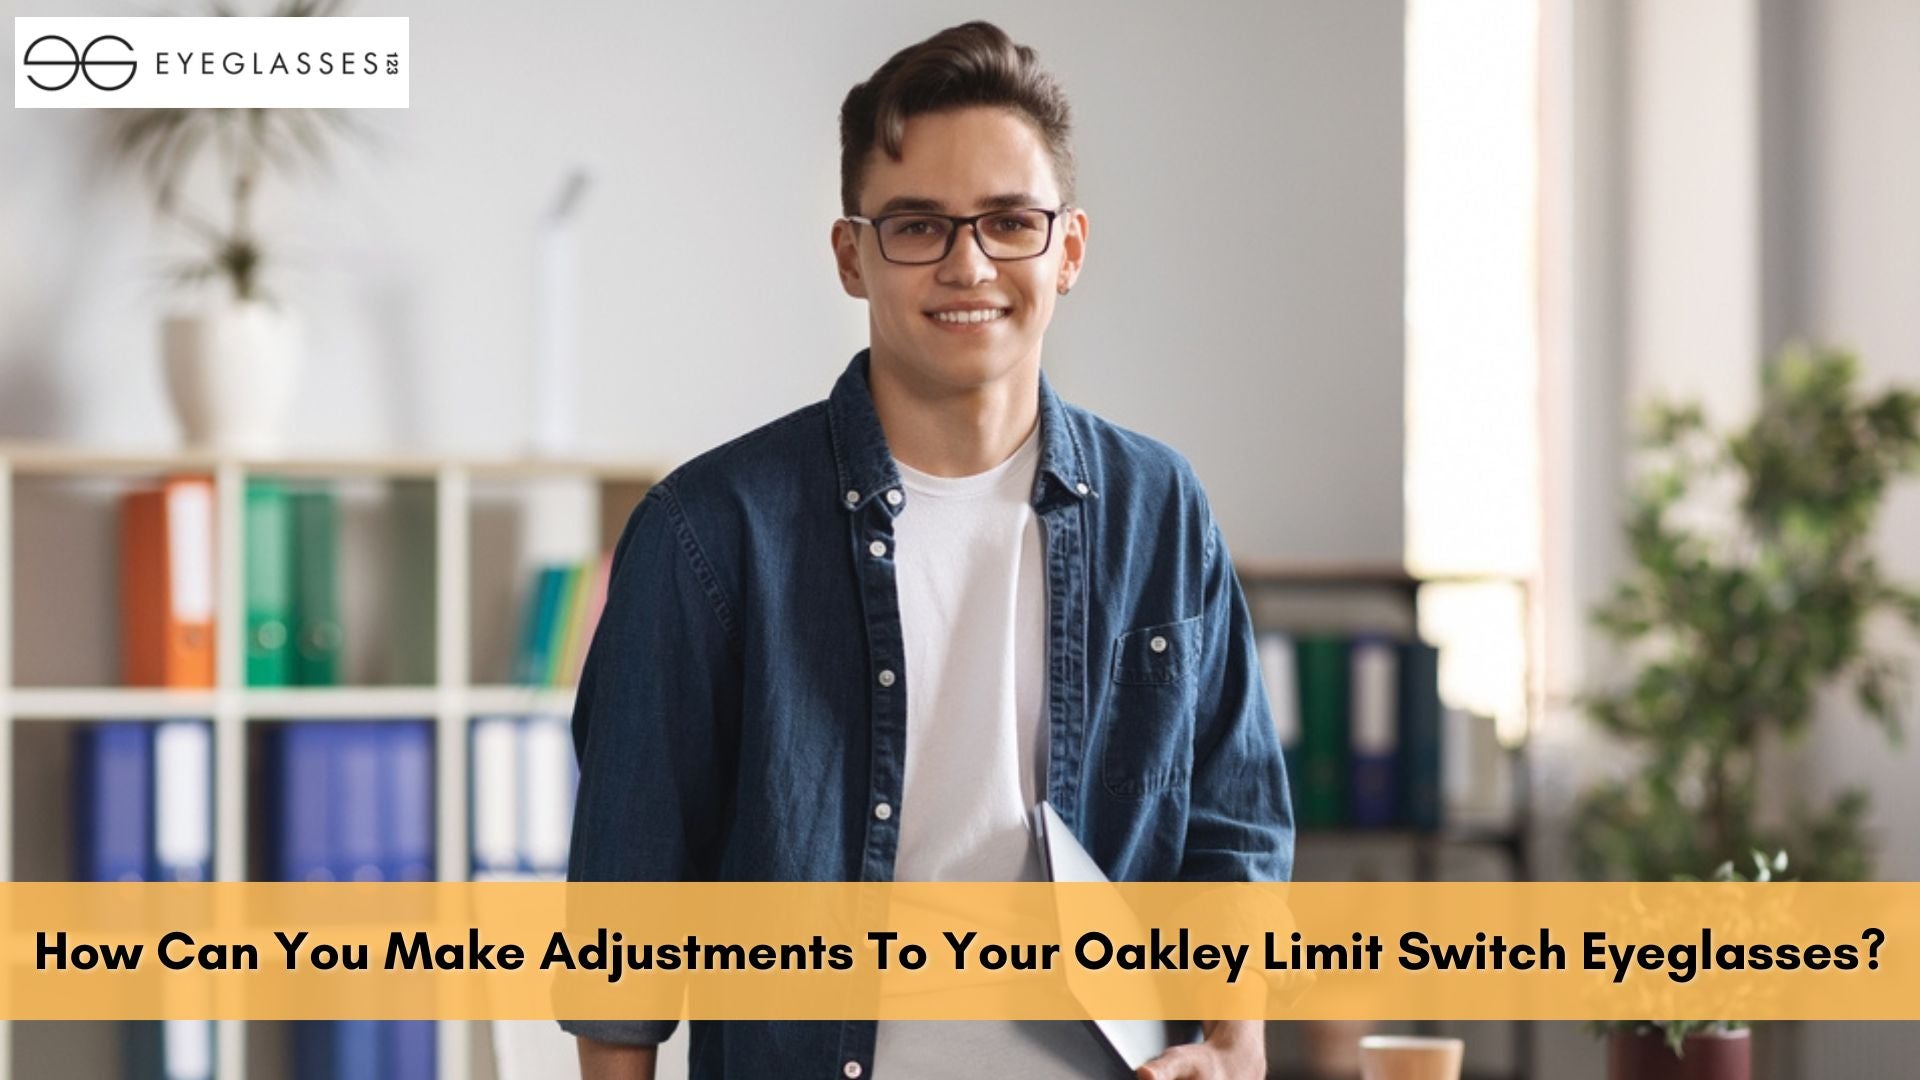 How Can You Make Adjustments To Your Oakley Limit Switch Eyeglasses?